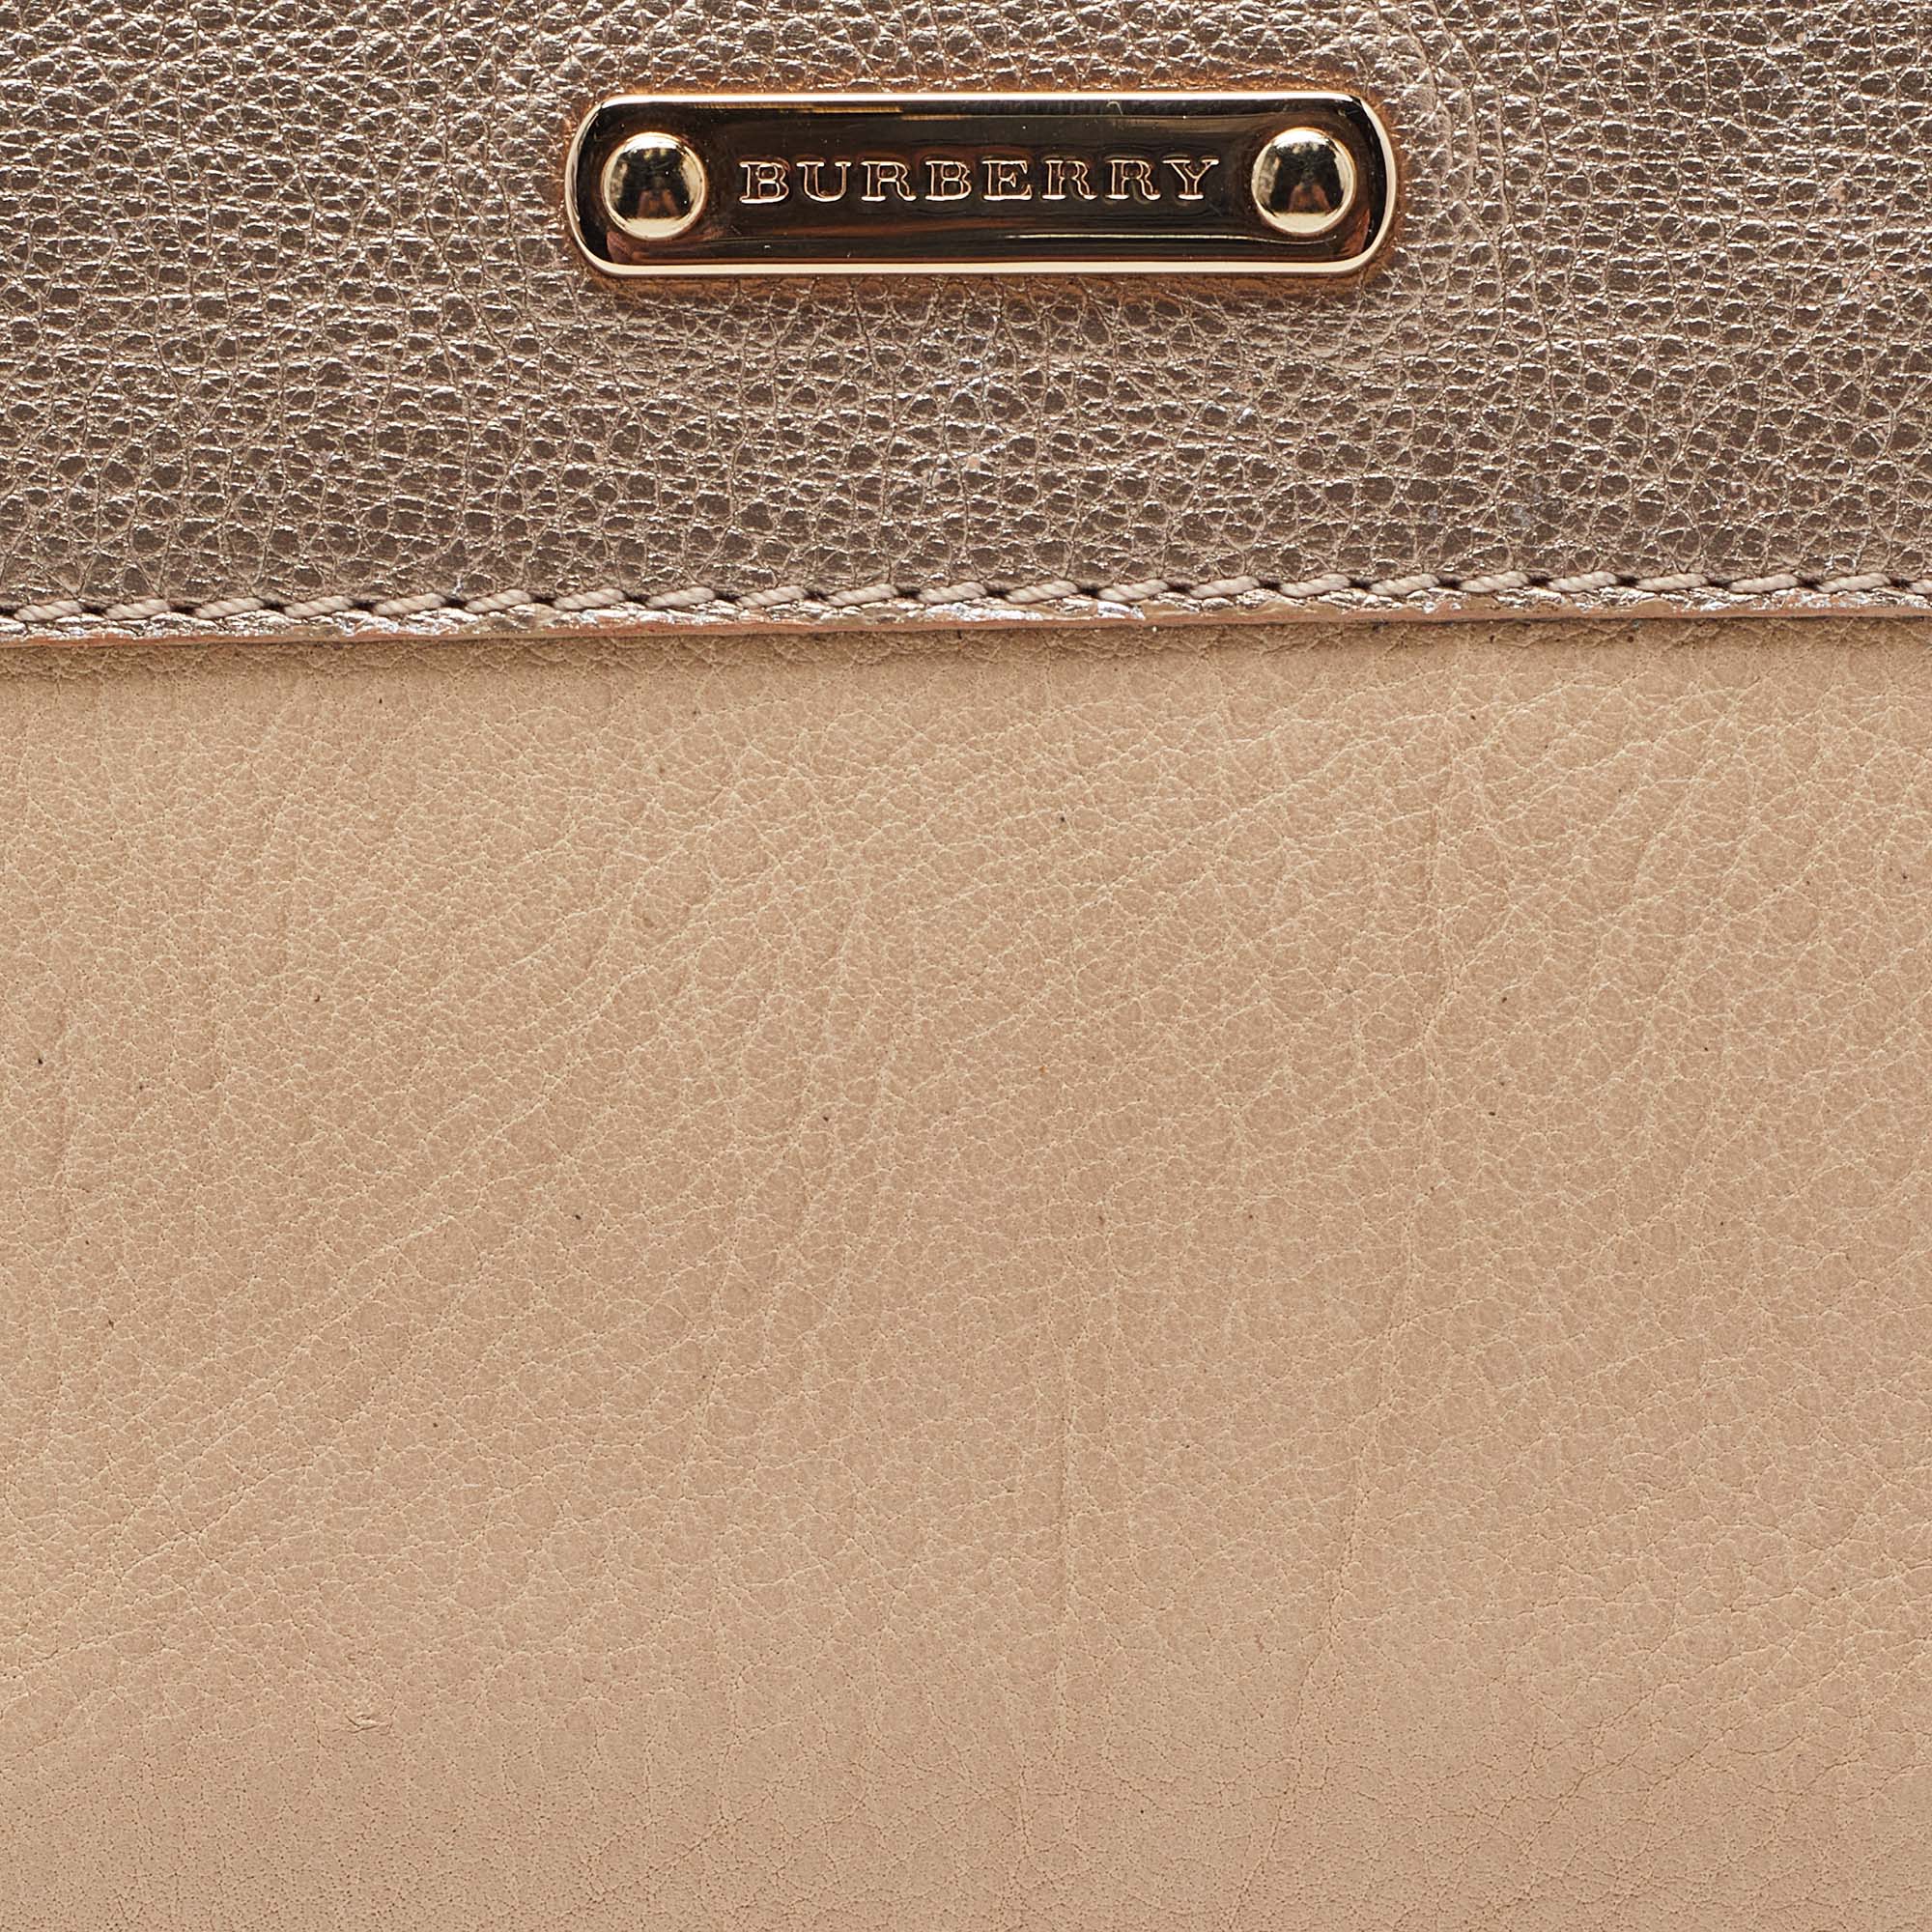 Burberry Beige/Gold Leather Double Zip Chain Wallet